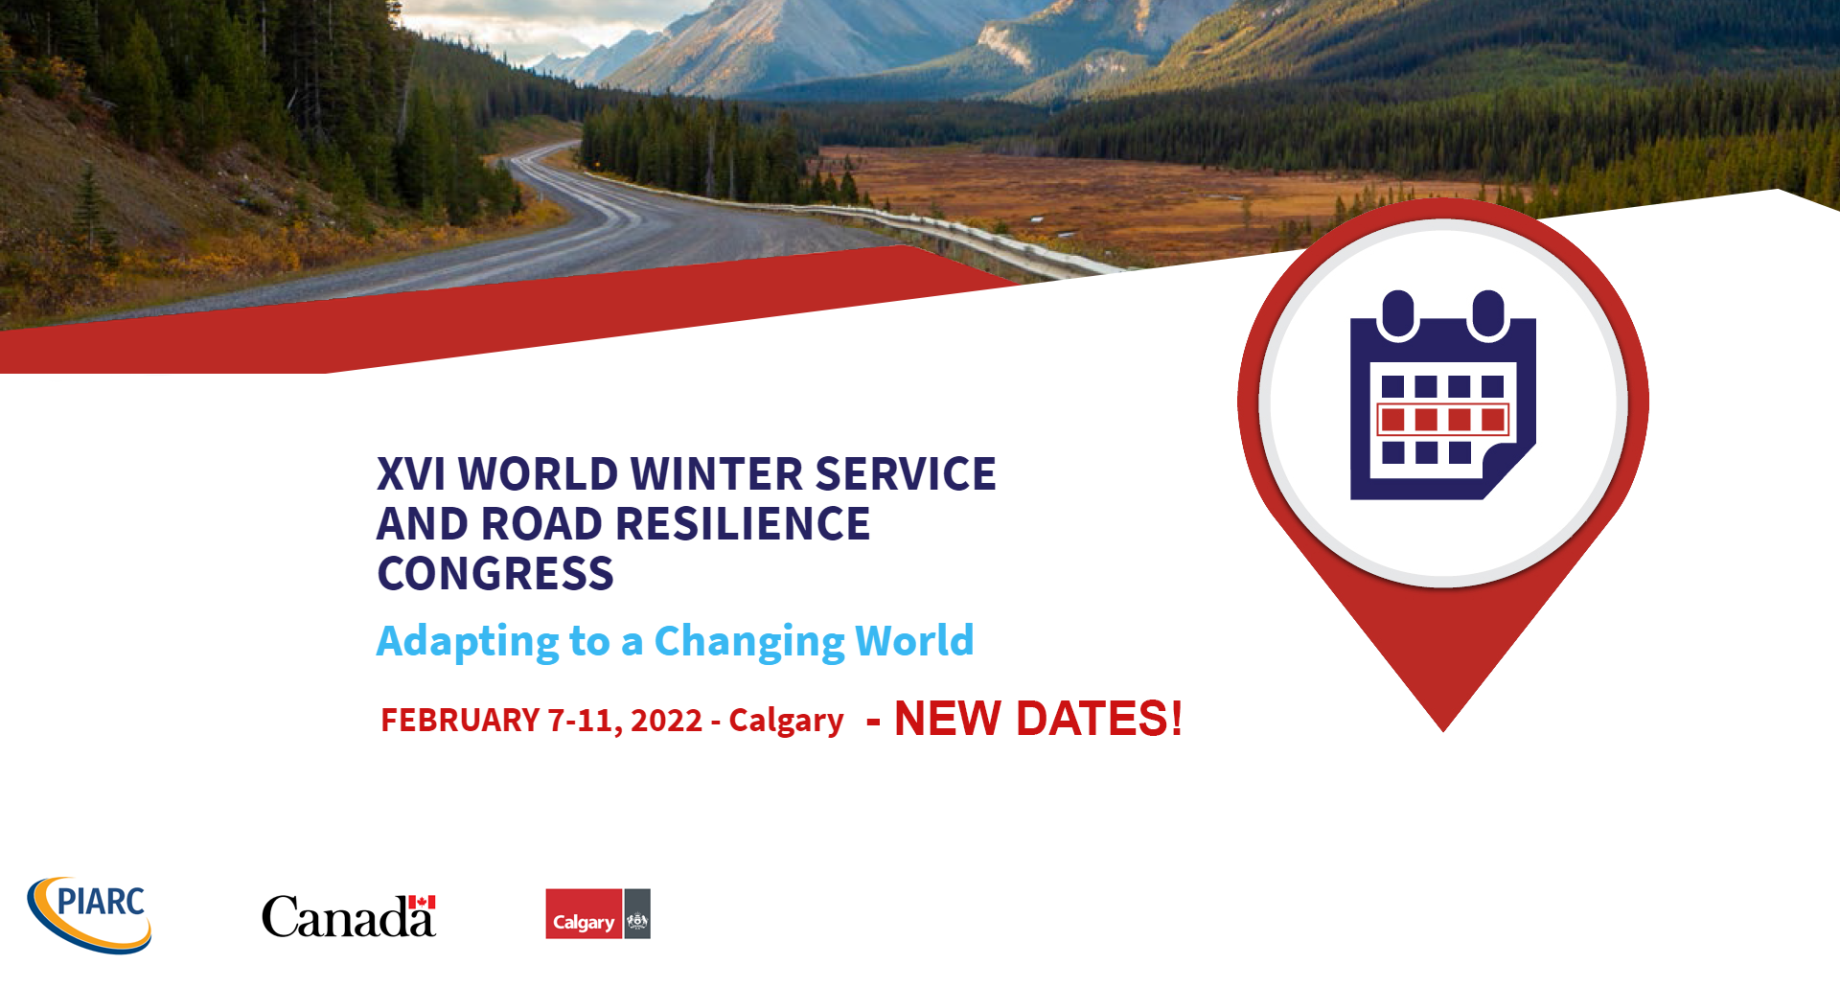 Save
the new dates for the World Winter Service and Road Resilience Congress in
Calgary in 2022!